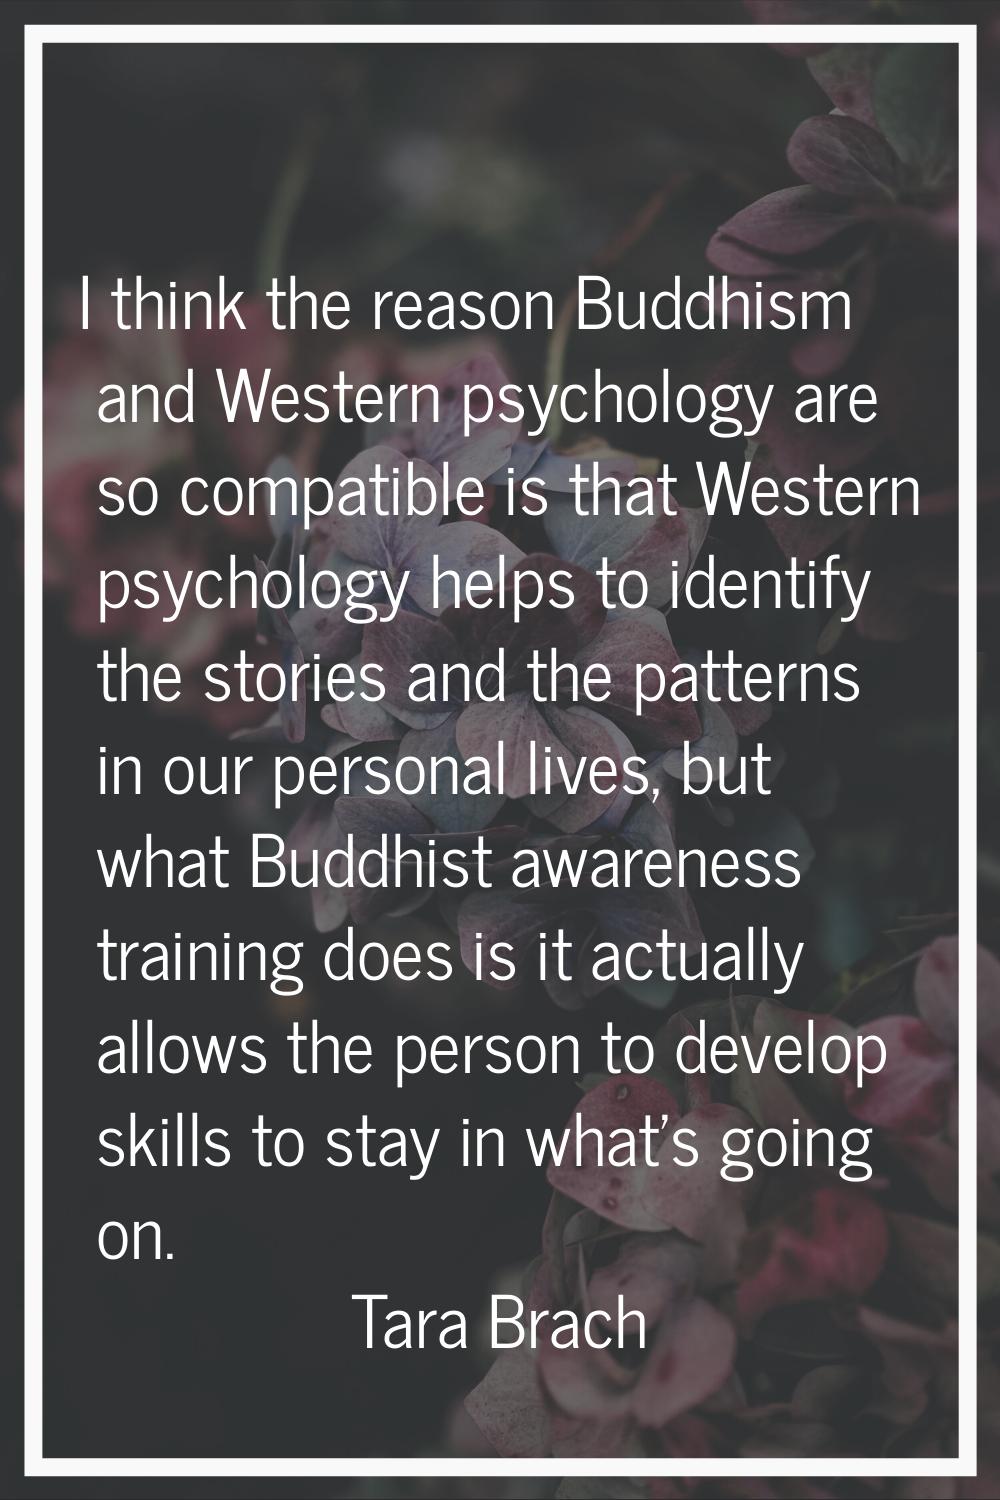 I think the reason Buddhism and Western psychology are so compatible is that Western psychology hel